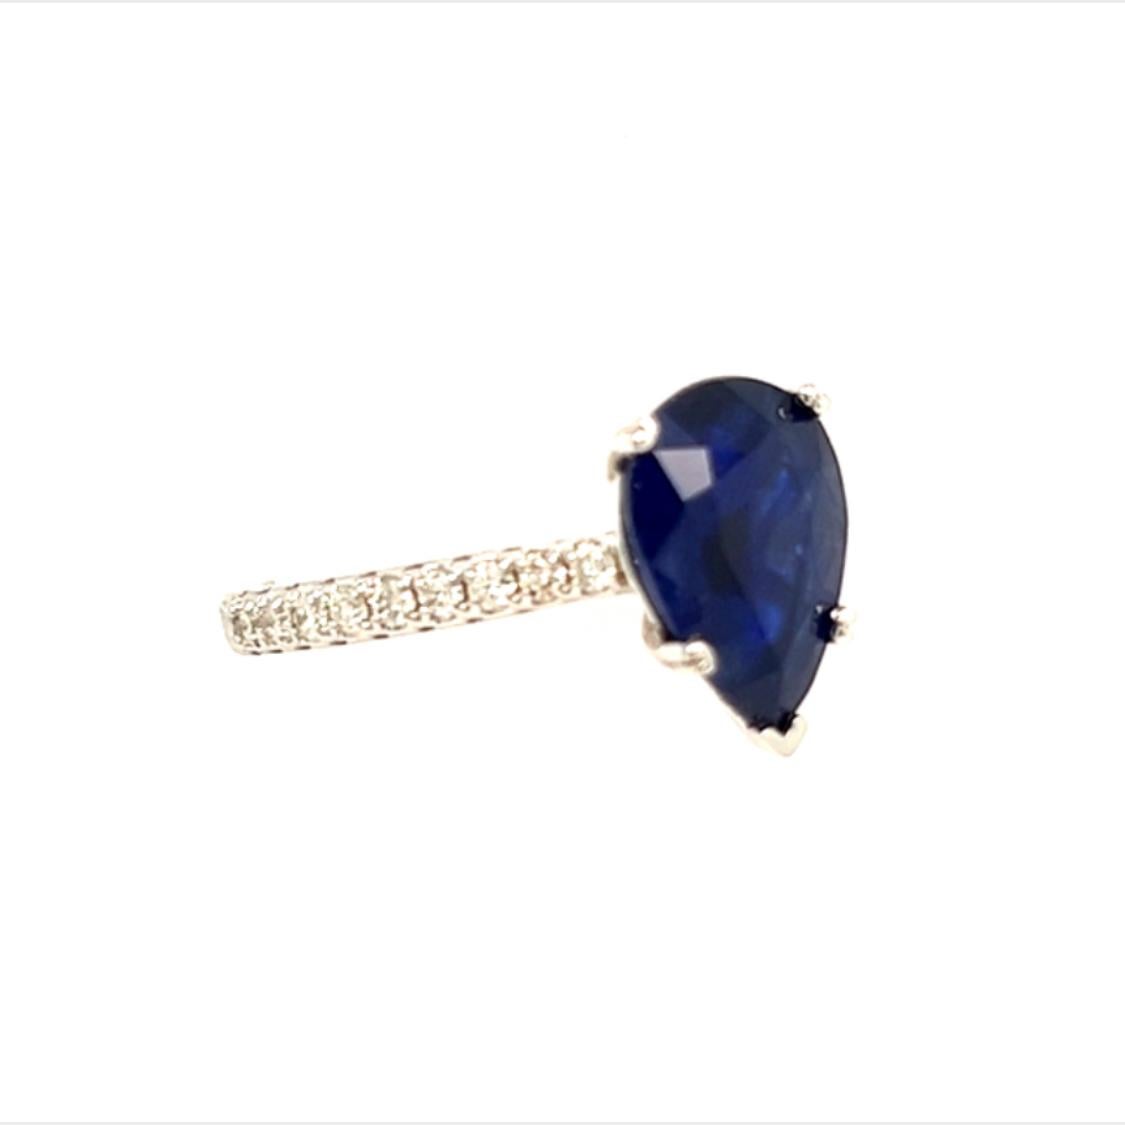 Sapphire Diamond Ring Size 6.5 14k Gold 2.77 TCW Certified For Sale 4